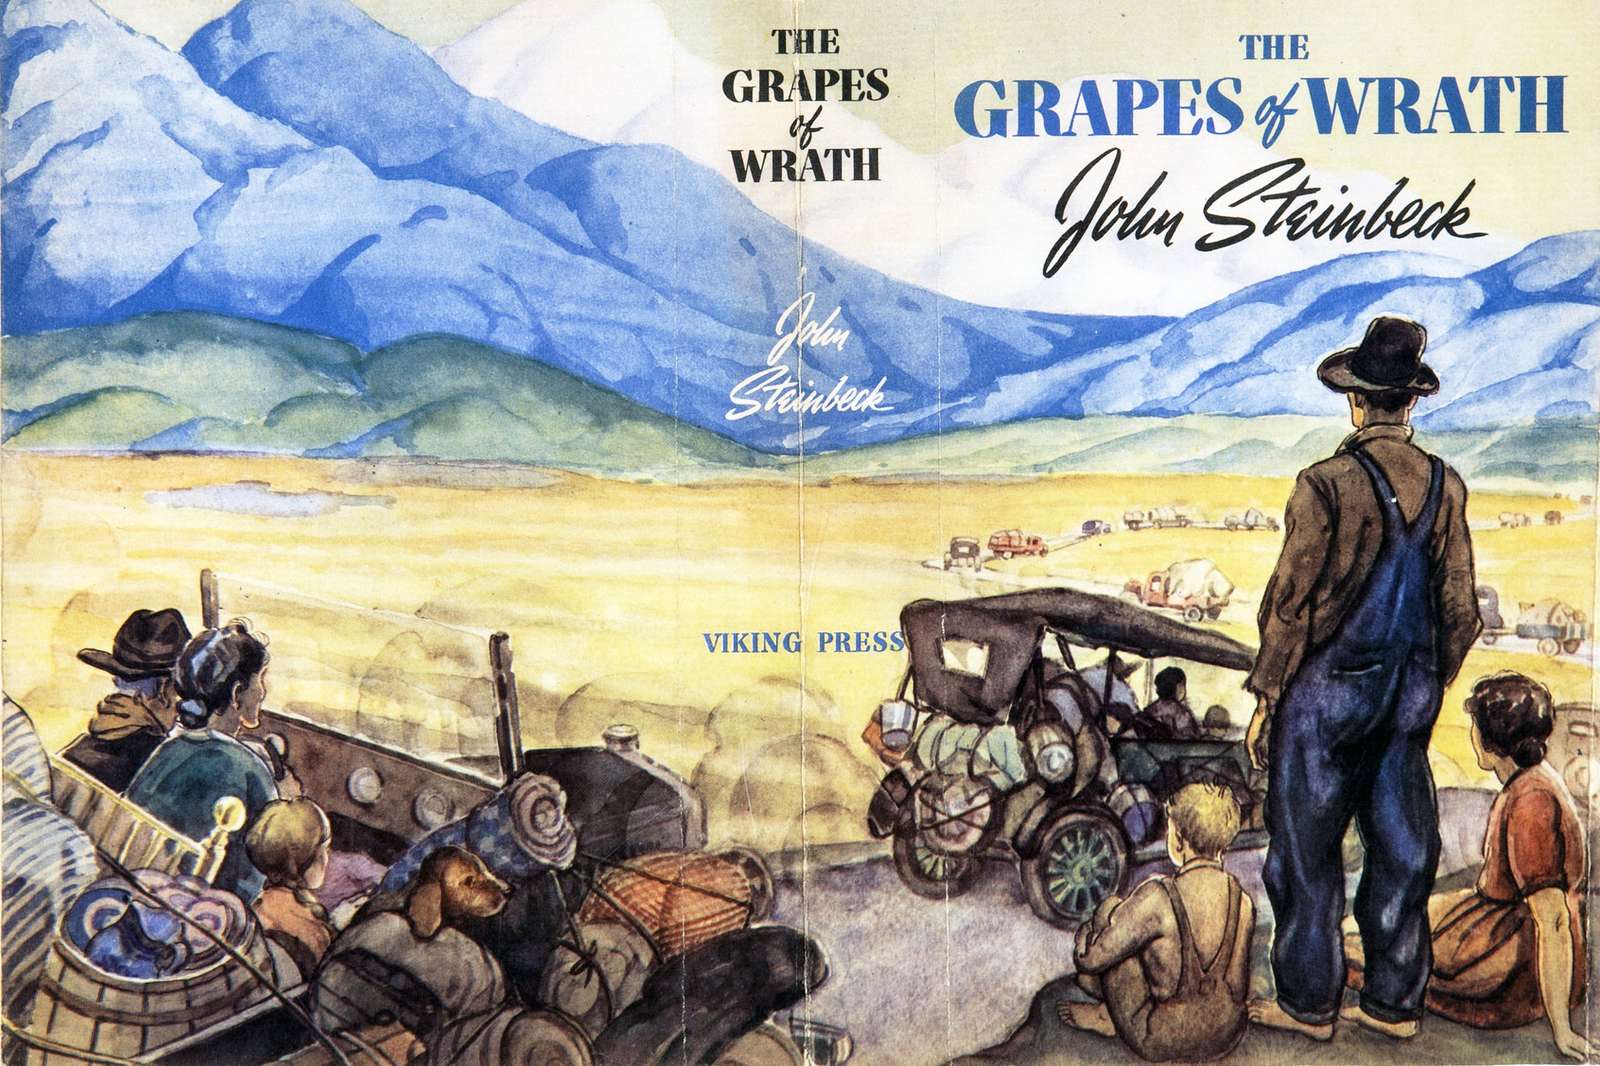 The Grapes of Wrath online puzzle